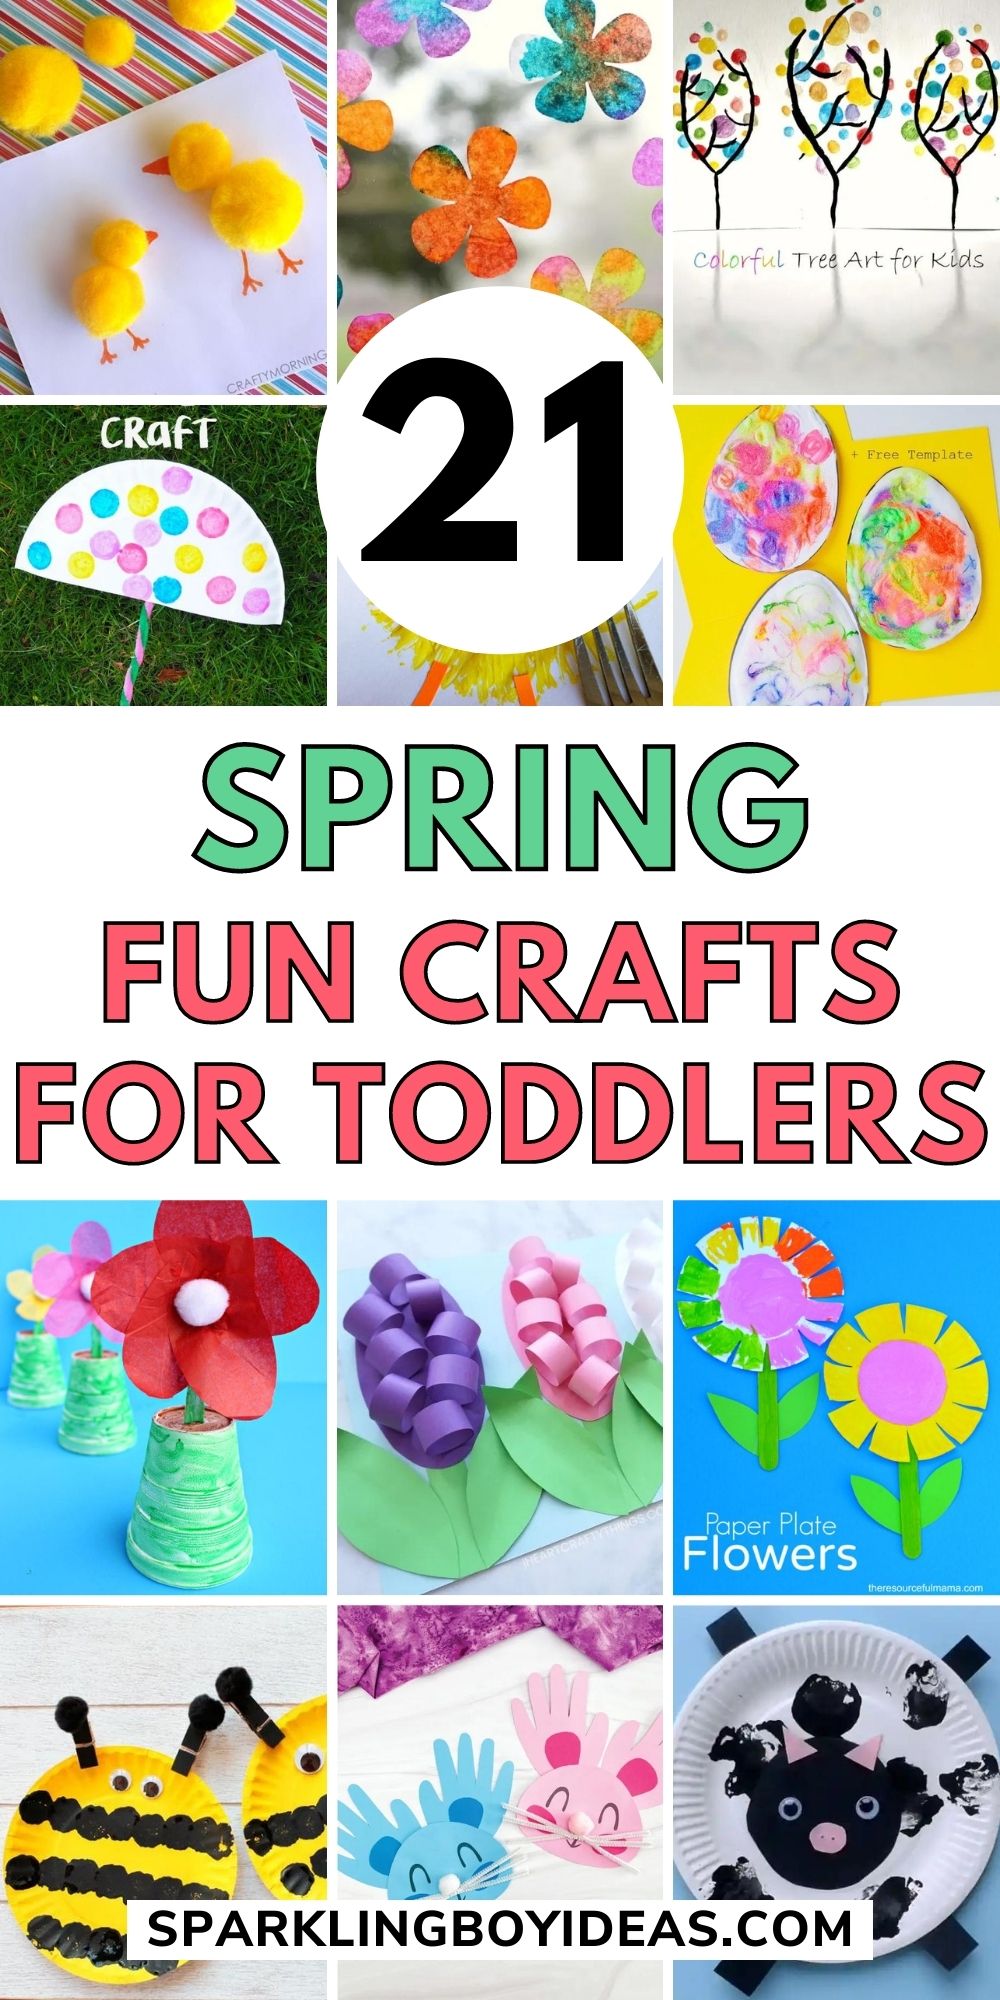 21 Fun Easy Spring Crafts For Toddlers - Sparkling Boy Ideas